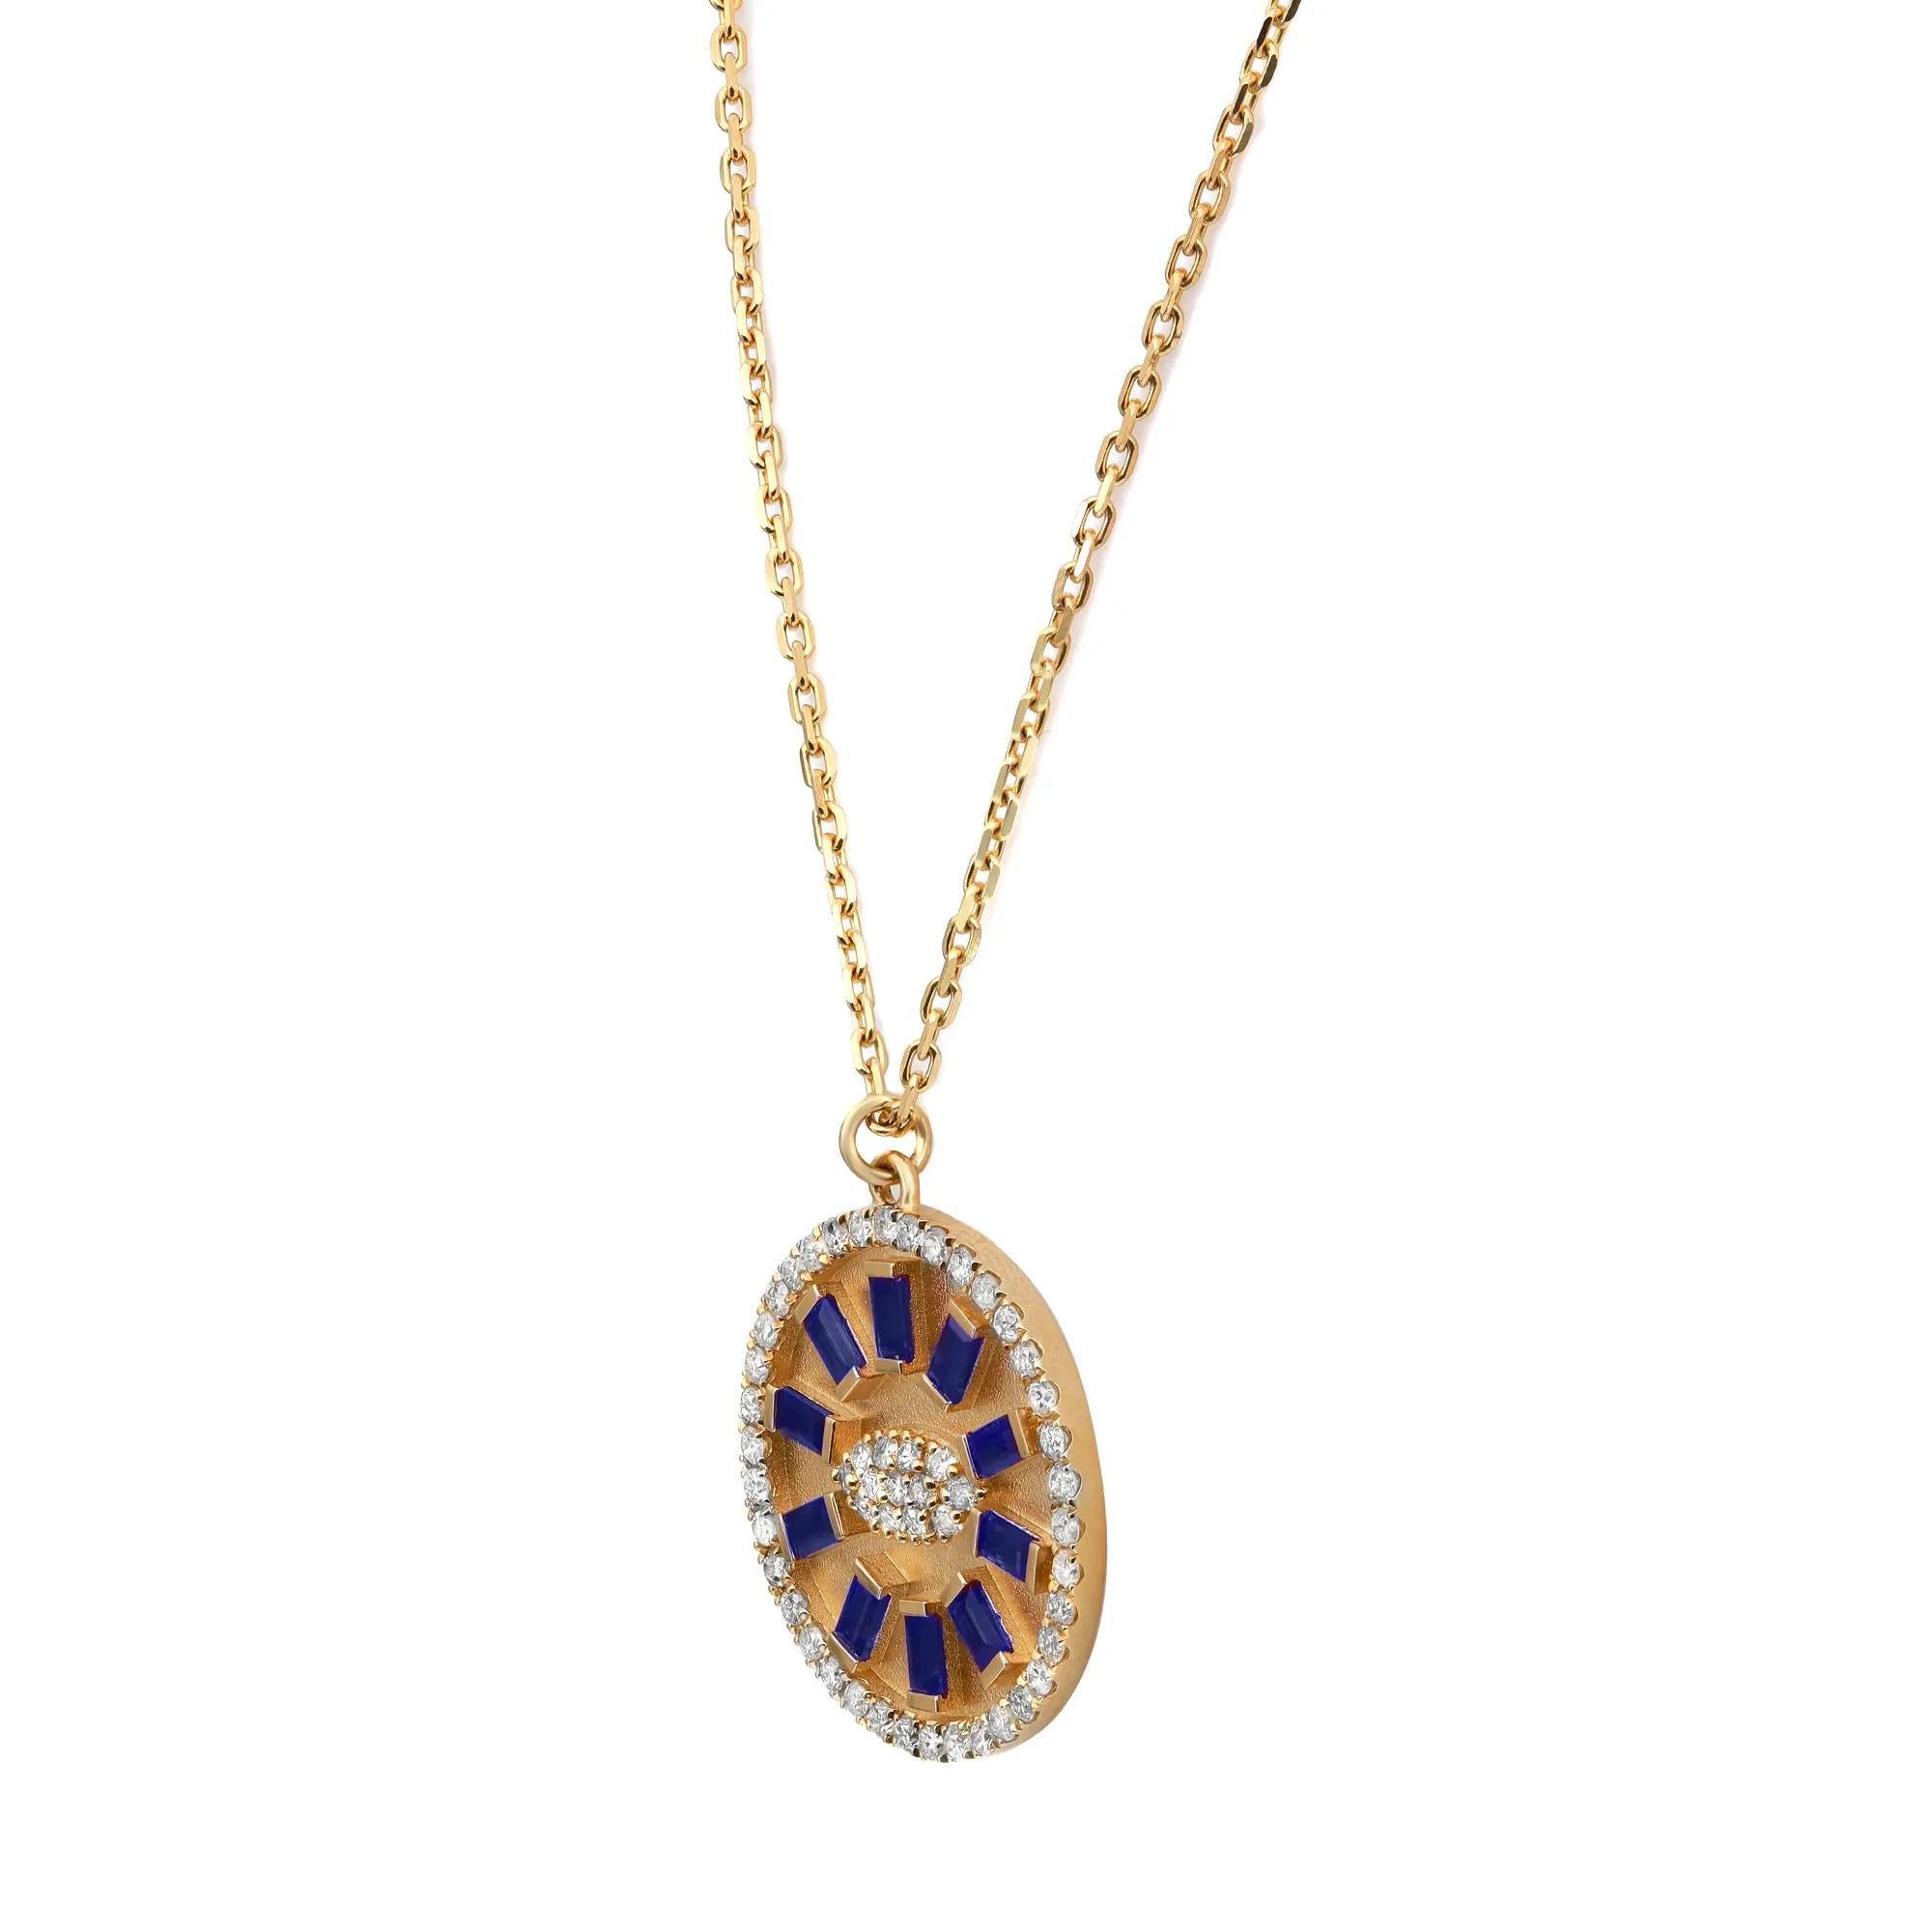 Fabulous and chic, this dazzling diamond and blue sapphire pendant necklace is a standout addition to your every day and evening looks. This piece gives a touch of elegance to any ensemble you pair it with. Features 10 half bezel set baguette cut